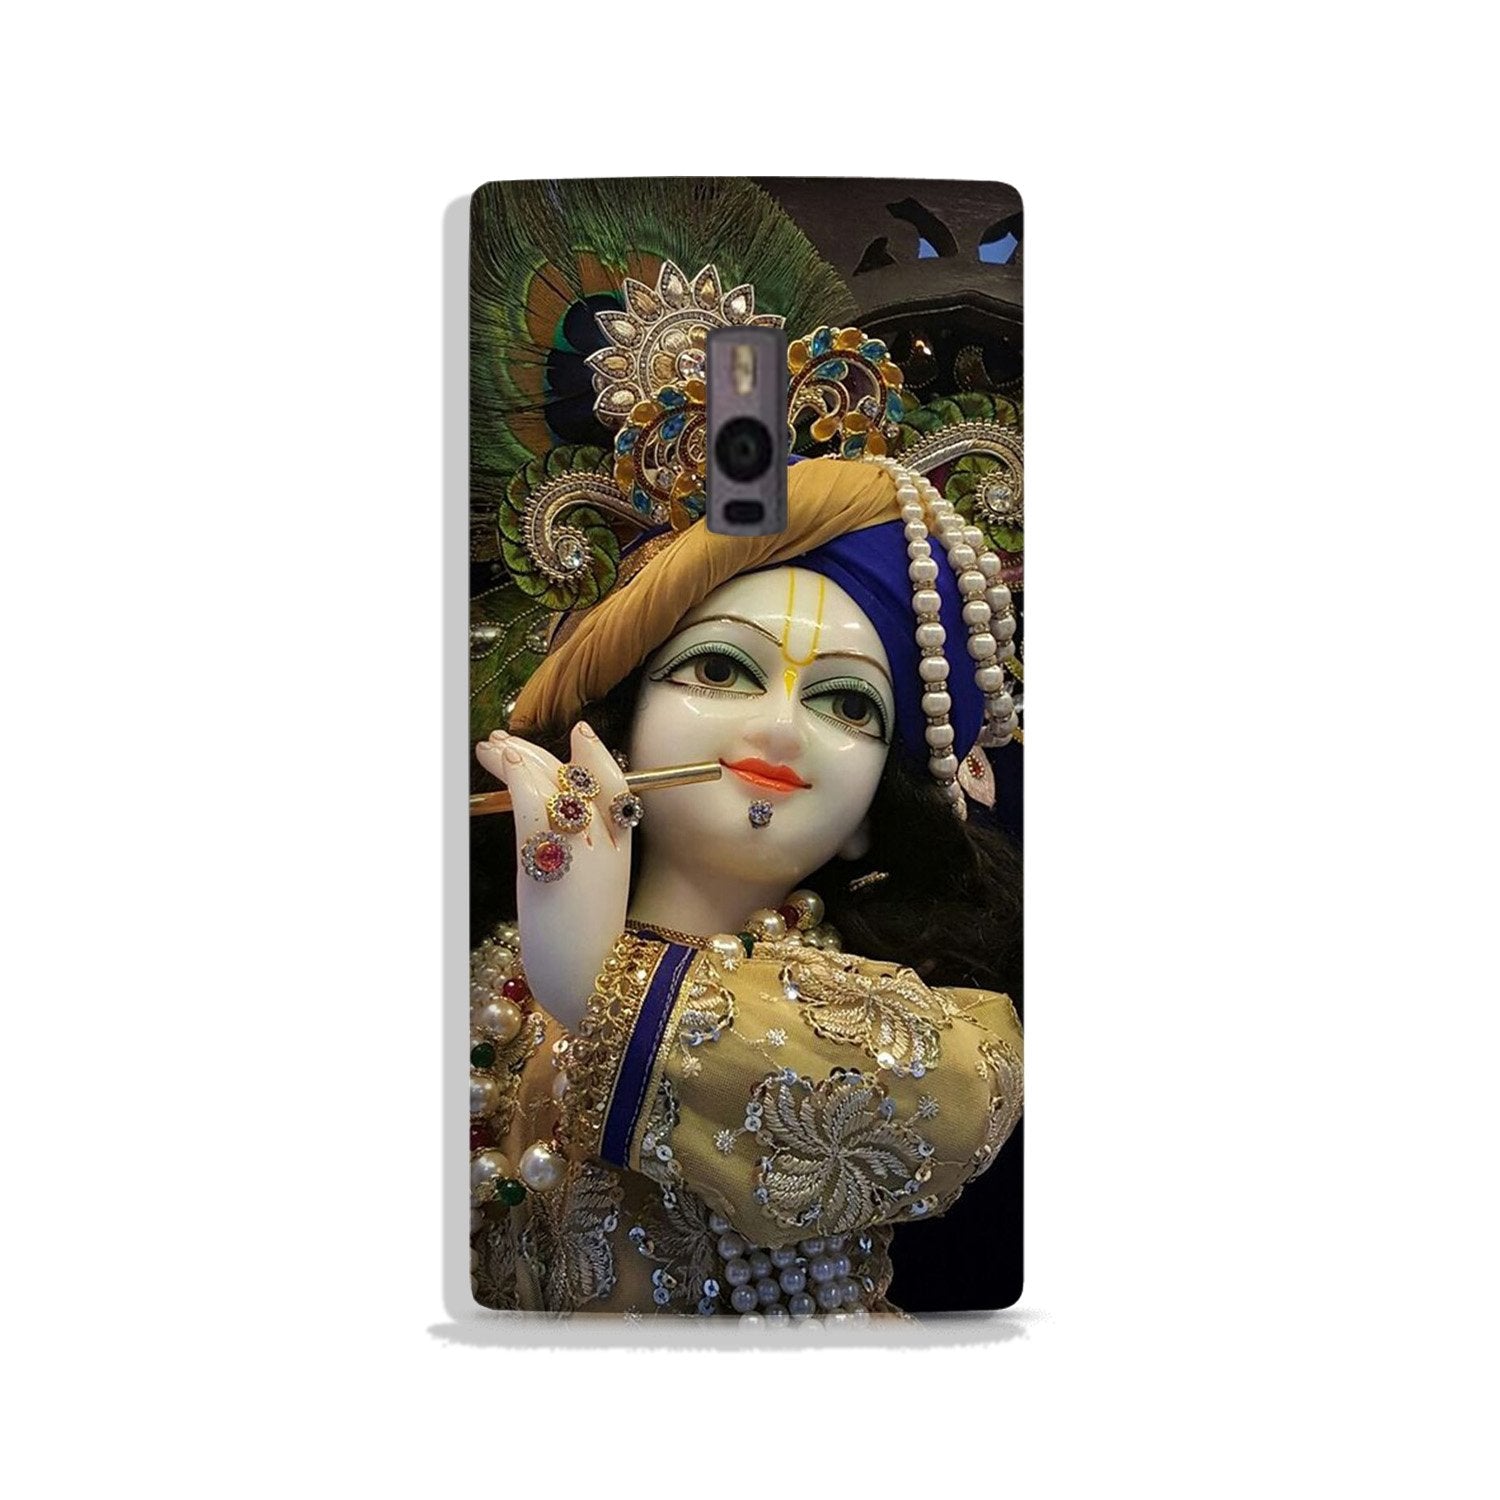 Lord Krishna3 Case for OnePlus 2